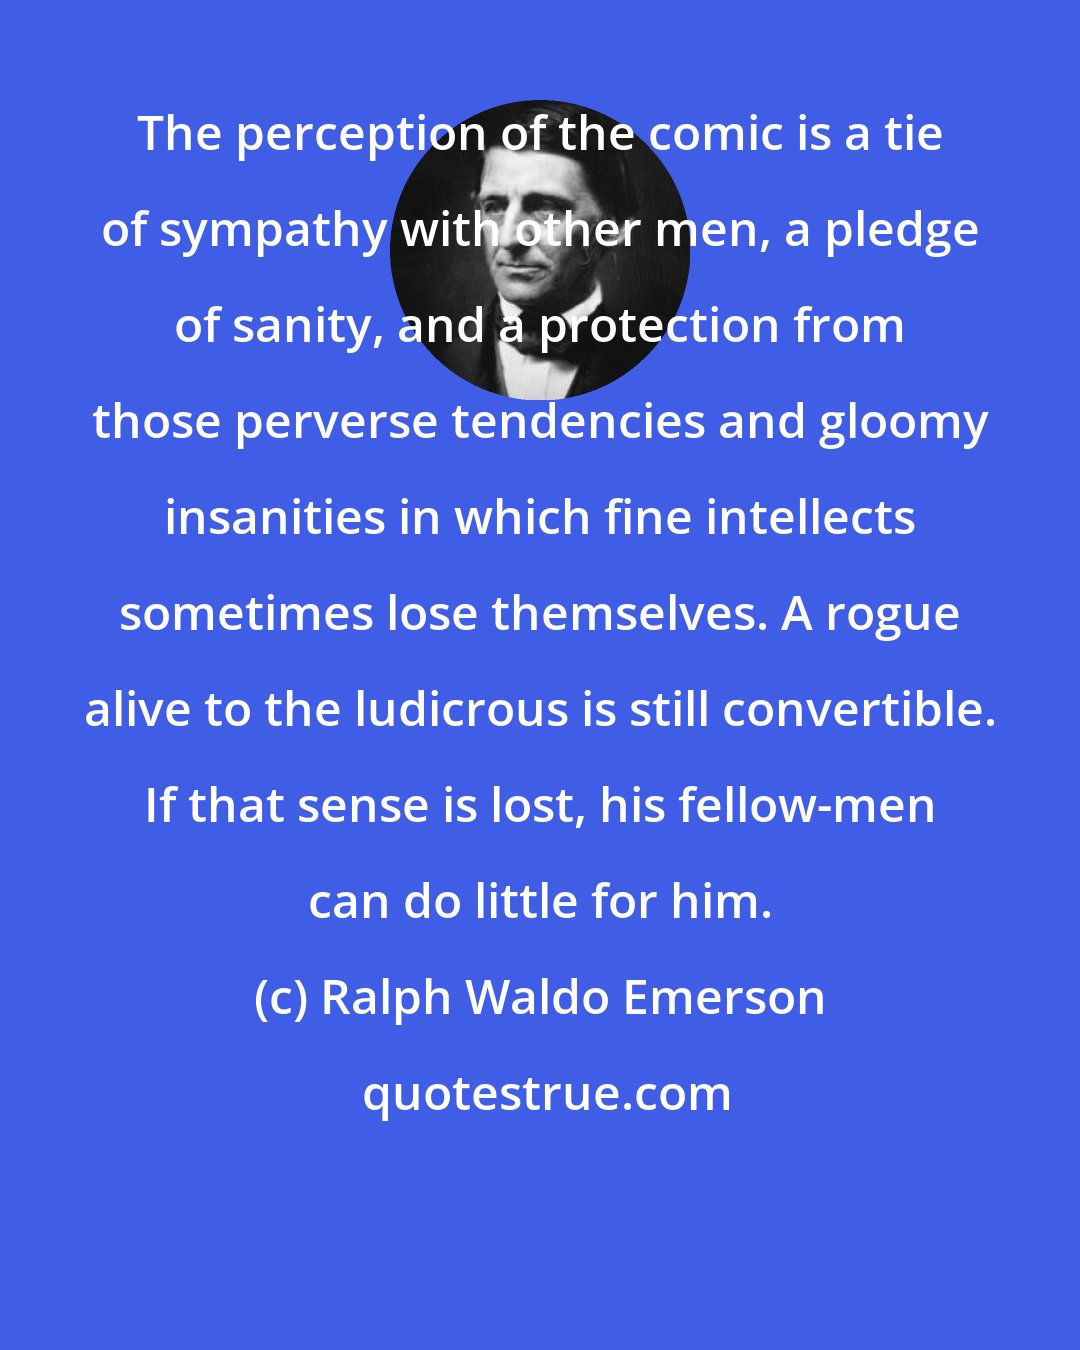 Ralph Waldo Emerson: The perception of the comic is a tie of sympathy with other men, a pledge of sanity, and a protection from those perverse tendencies and gloomy insanities in which fine intellects sometimes lose themselves. A rogue alive to the ludicrous is still convertible. If that sense is lost, his fellow-men can do little for him.